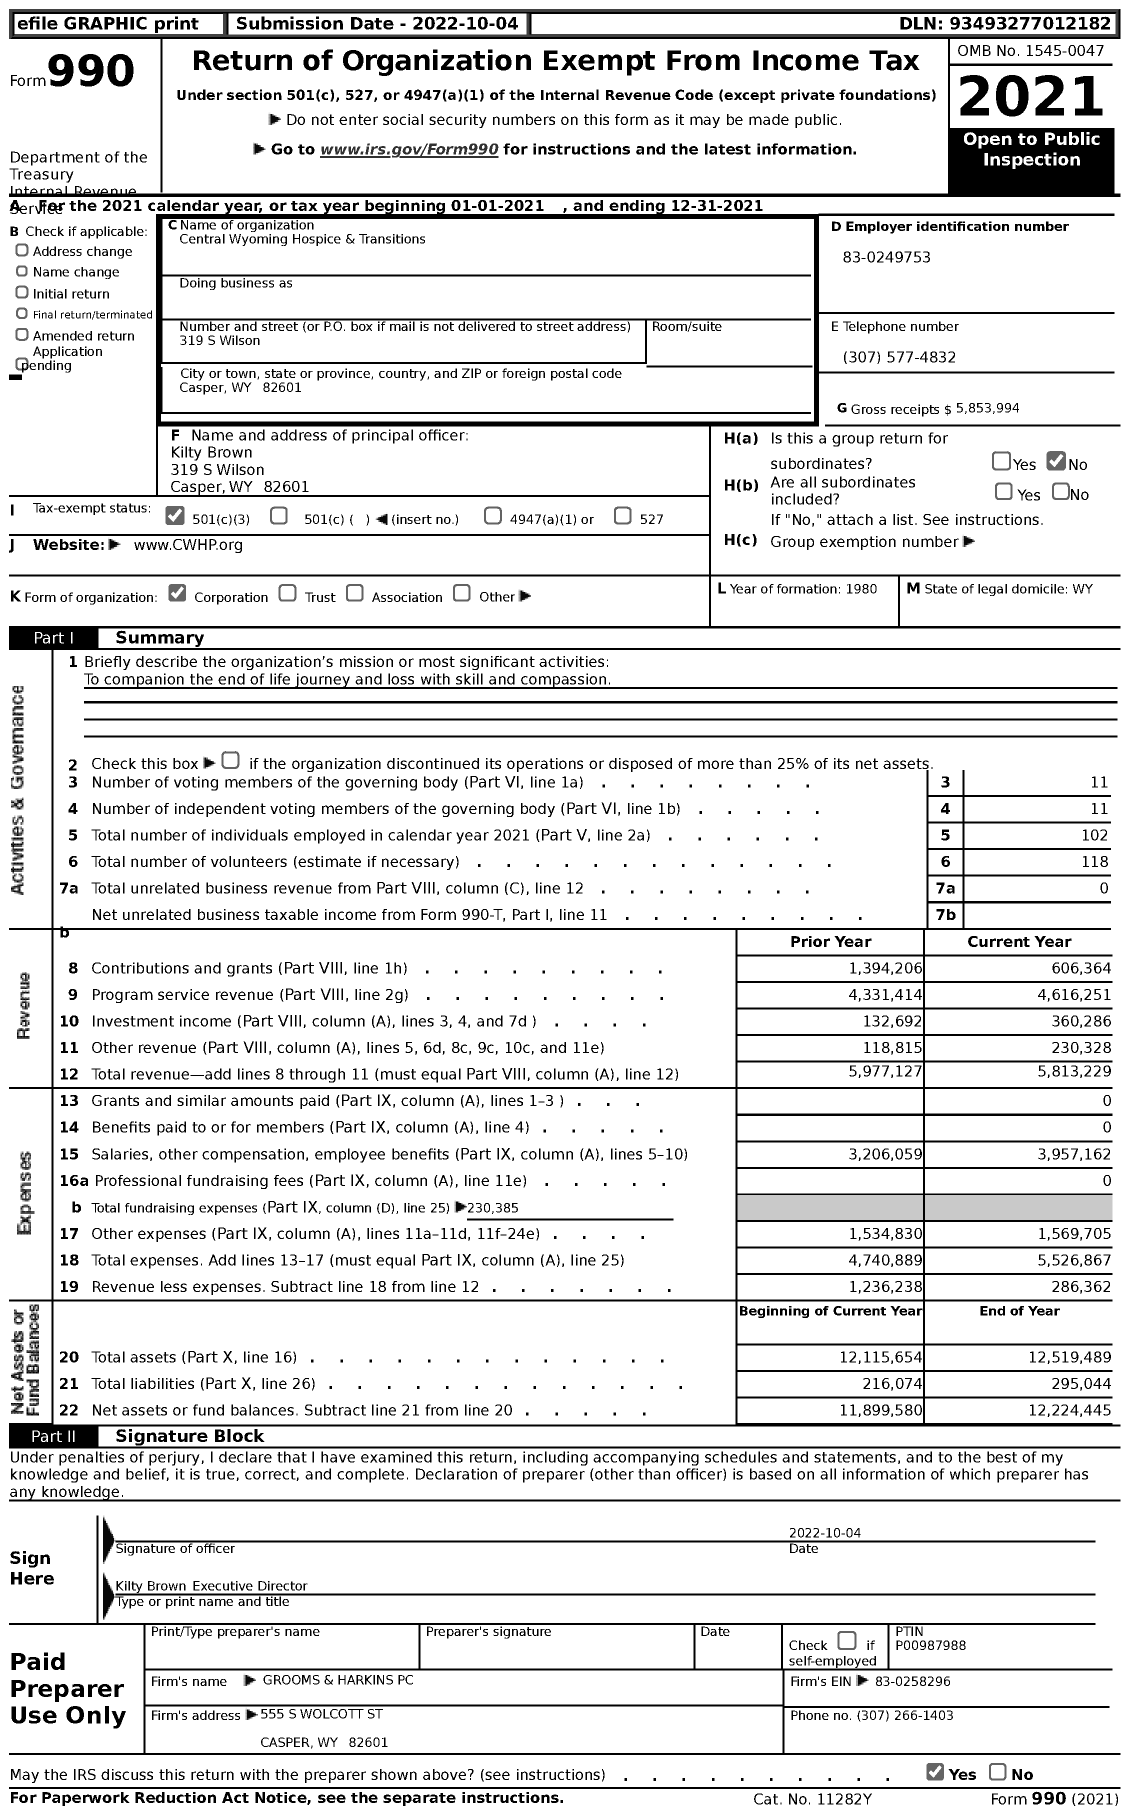 Image of first page of 2021 Form 990 for Central Wyoming Hospice and Transitions